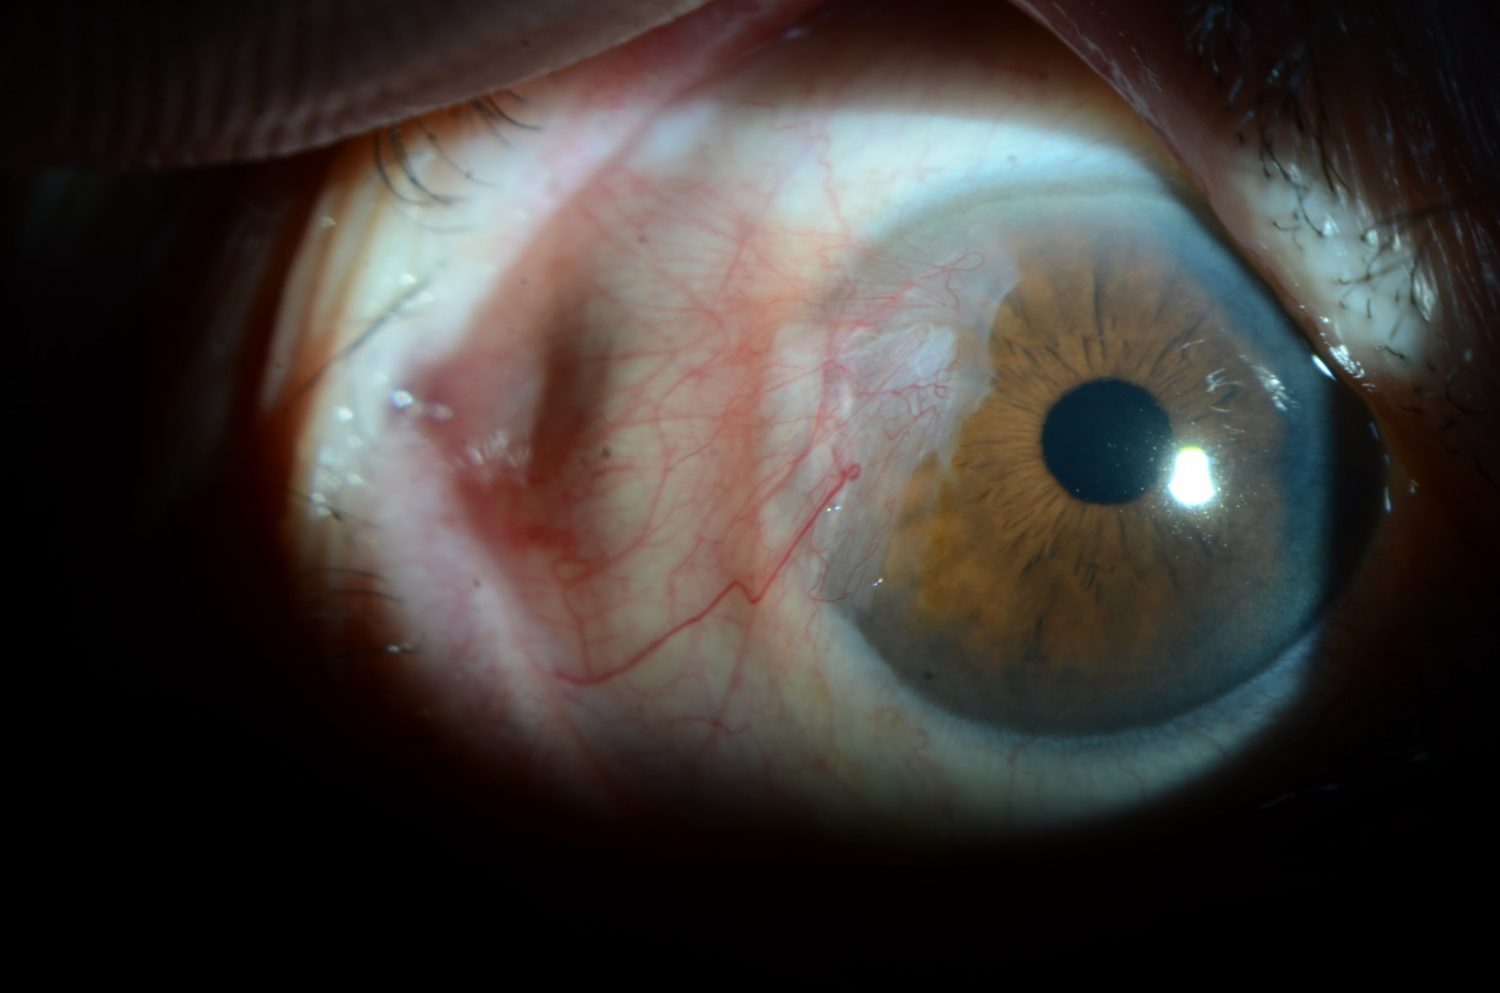 Temporal pterygium growing over the cornea. This has followed after having cataract surgery.